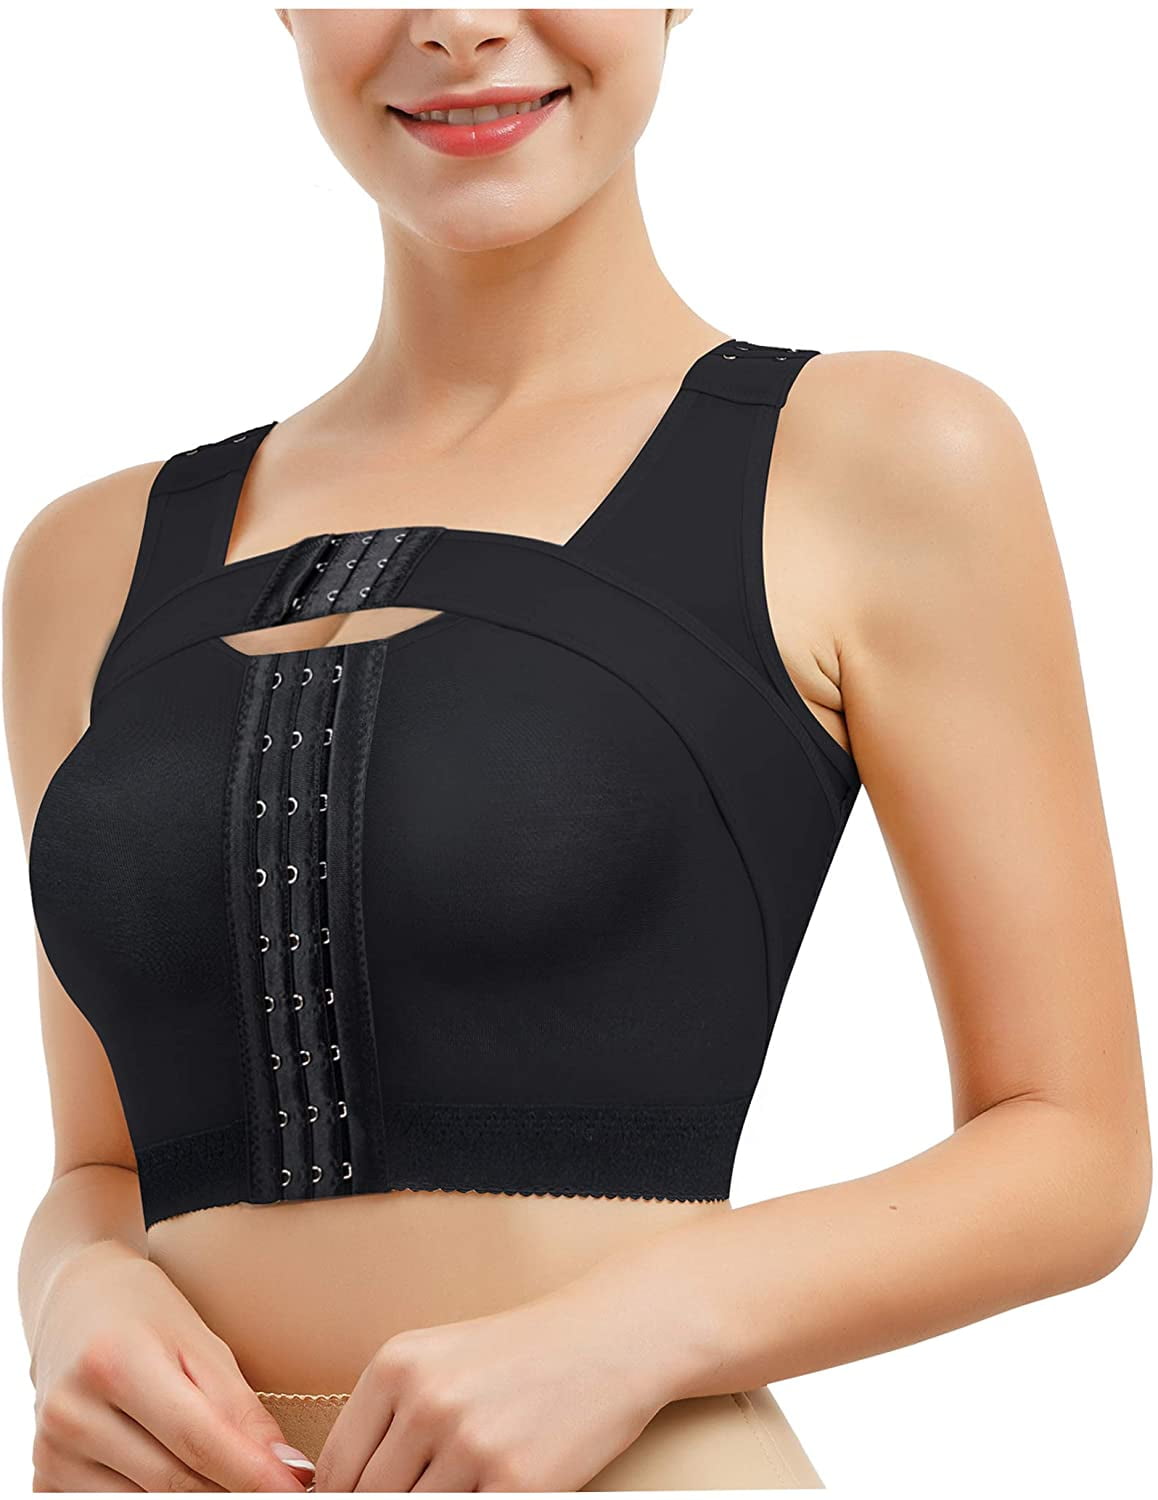 Best Deal for RDSIANE Womens Compression Shaper Tops for Breast Post